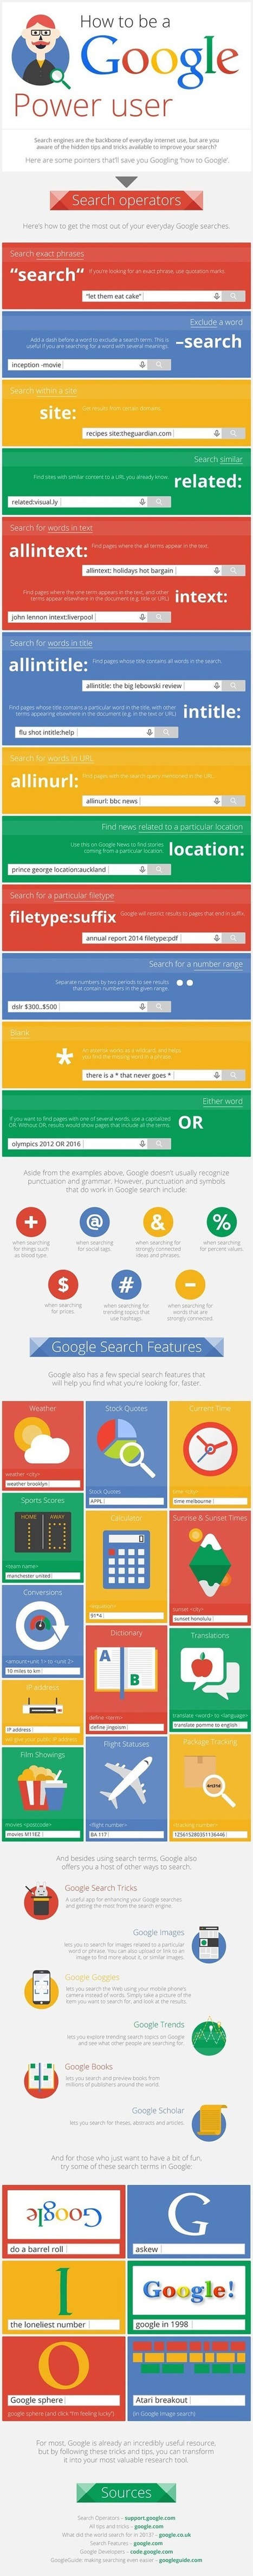 46 Hidden Tips and Tricks to Use Google Search Like a Boss: Infographic | Social Media Resources & e-learning | Scoop.it